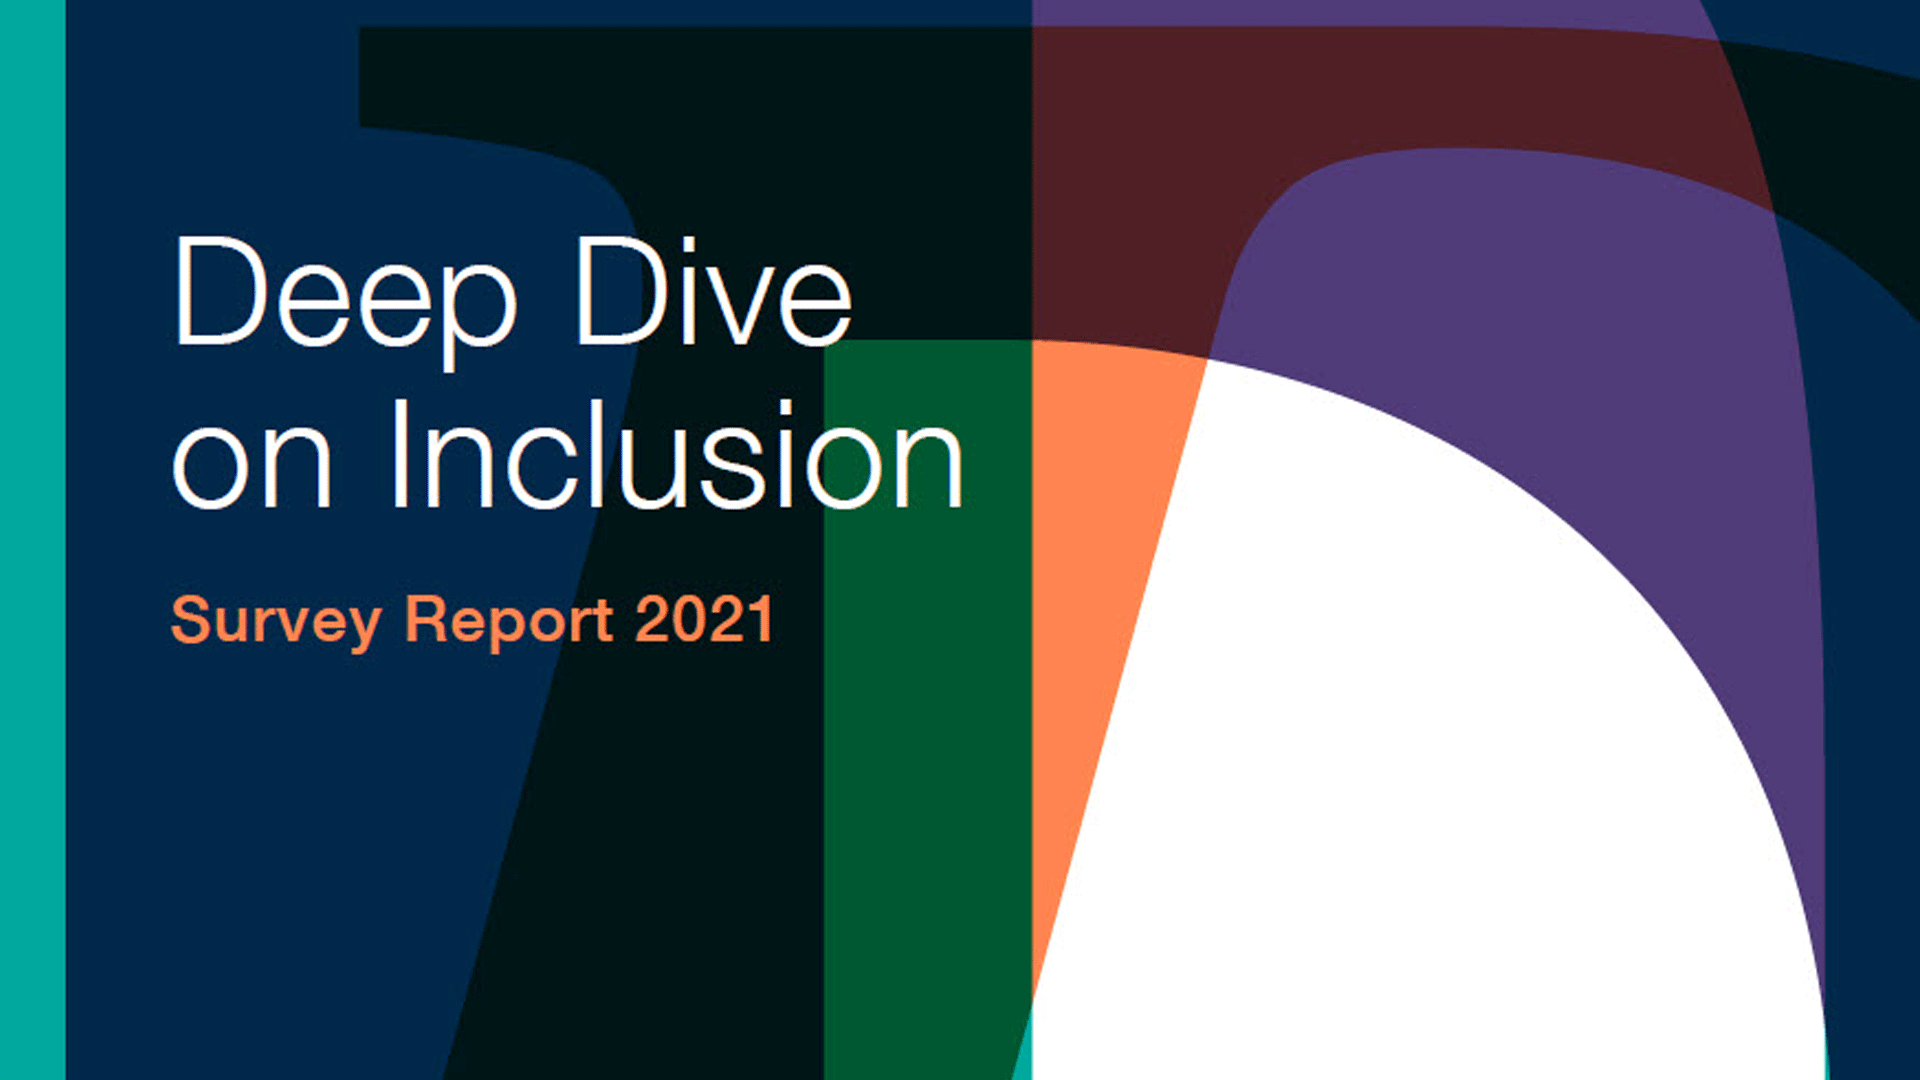 Deep Dive on Inclusion 2021